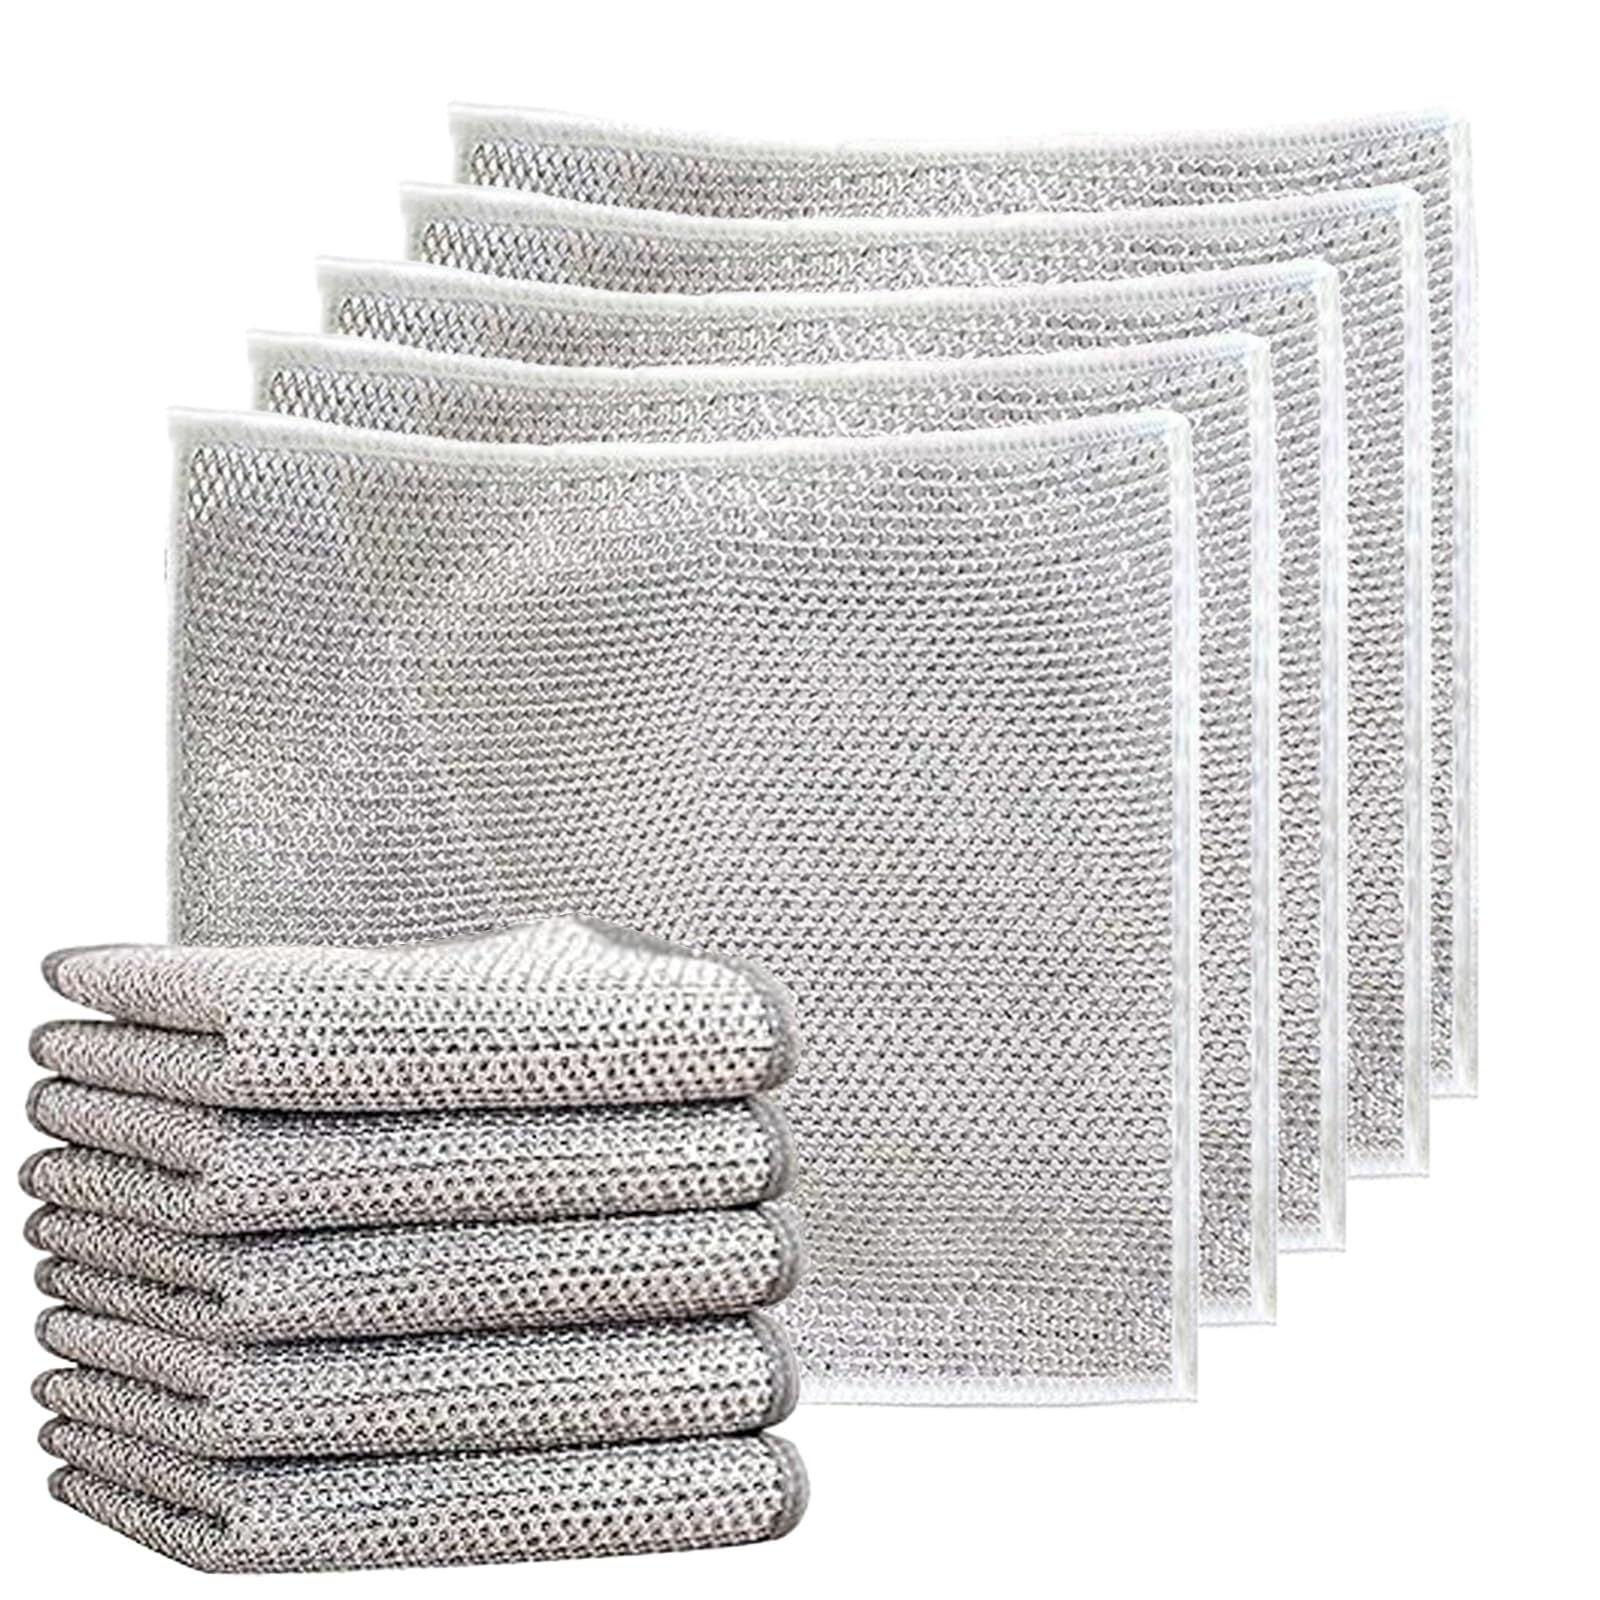  Geistle Multipurpose Non-Scratch Scrubbing Wire Dishwashing Rags,  Multipurpose Wire Dishwashing Rags for Wet and Dry, Wire Dishwashing Rag,  for Dishes, Sinks, Counters, Stove Tops (10Pcs) : Health & Household